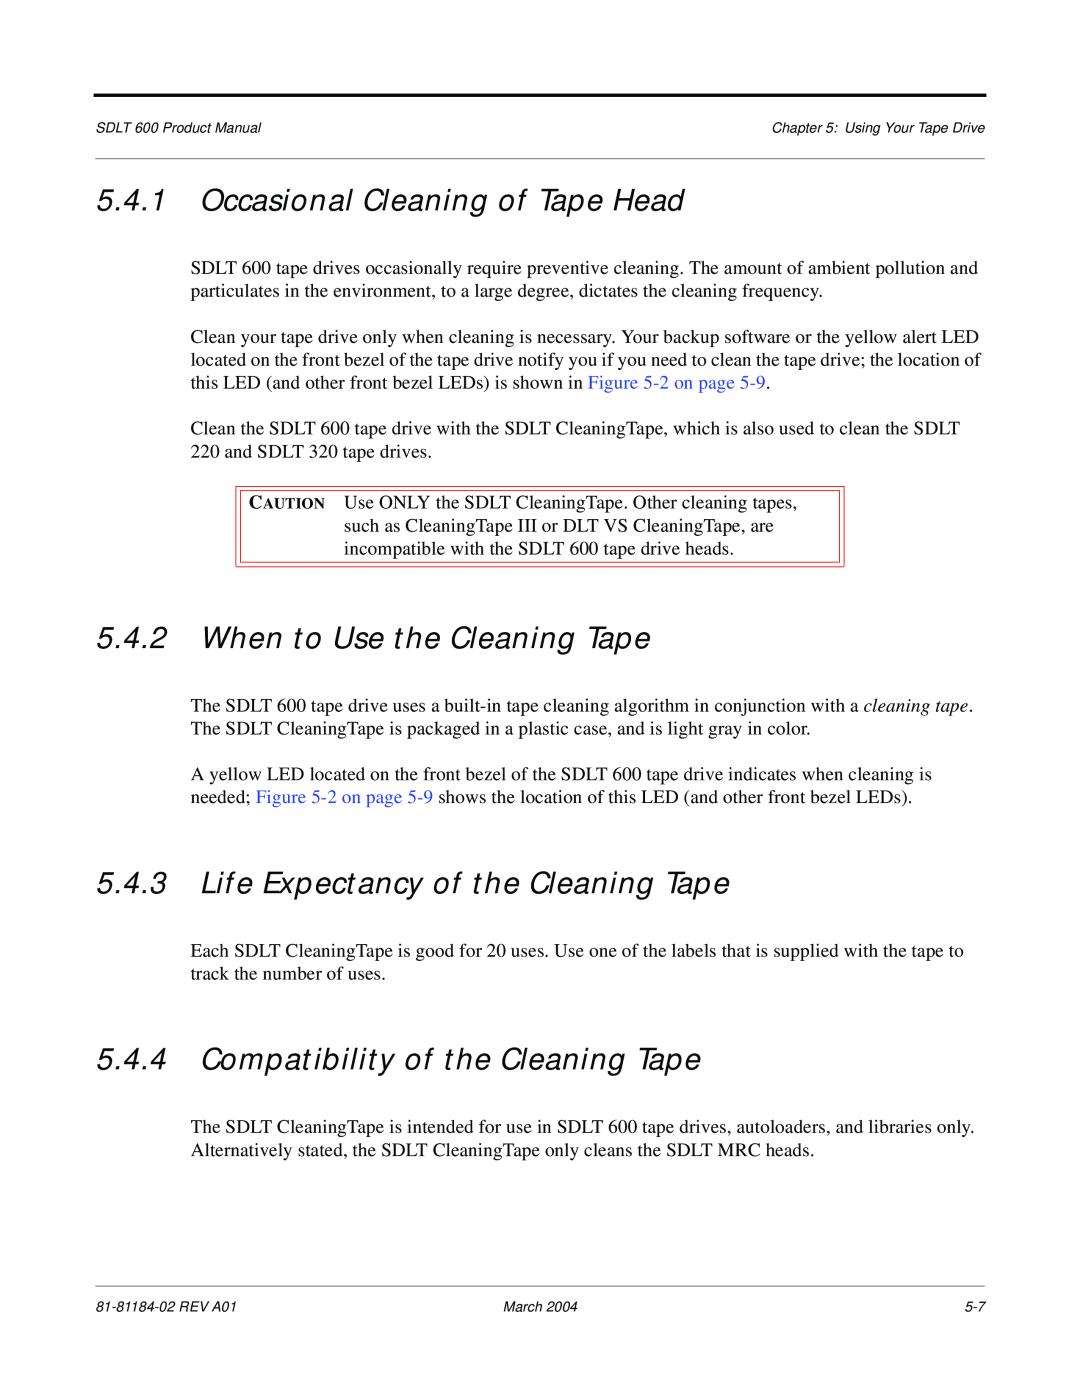 Tandberg Data 600 Occasional Cleaning of Tape Head, When to Use the Cleaning Tape, Life Expectancy of the Cleaning Tape 